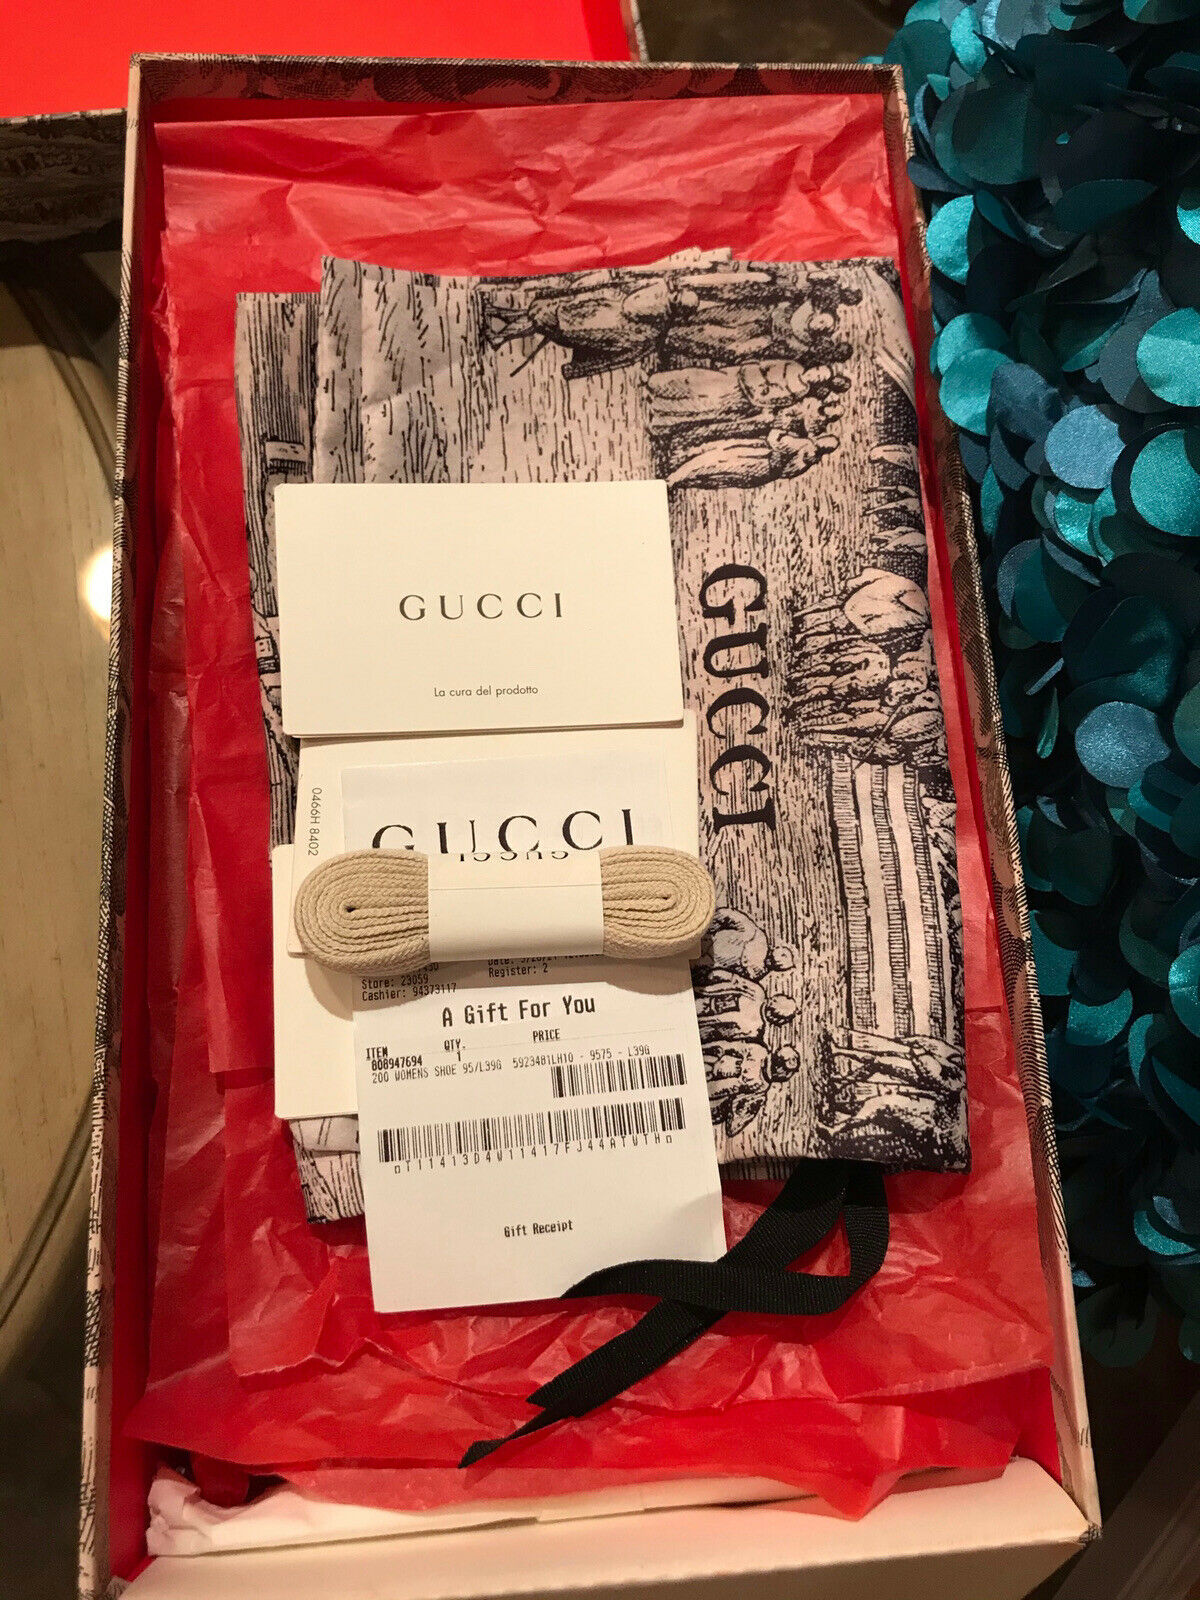 HOT Gucci Ultrapace Athleisure Sneaker - Women's Leather Italy Size 39/ US 9 NIB - Myluxurytrunk